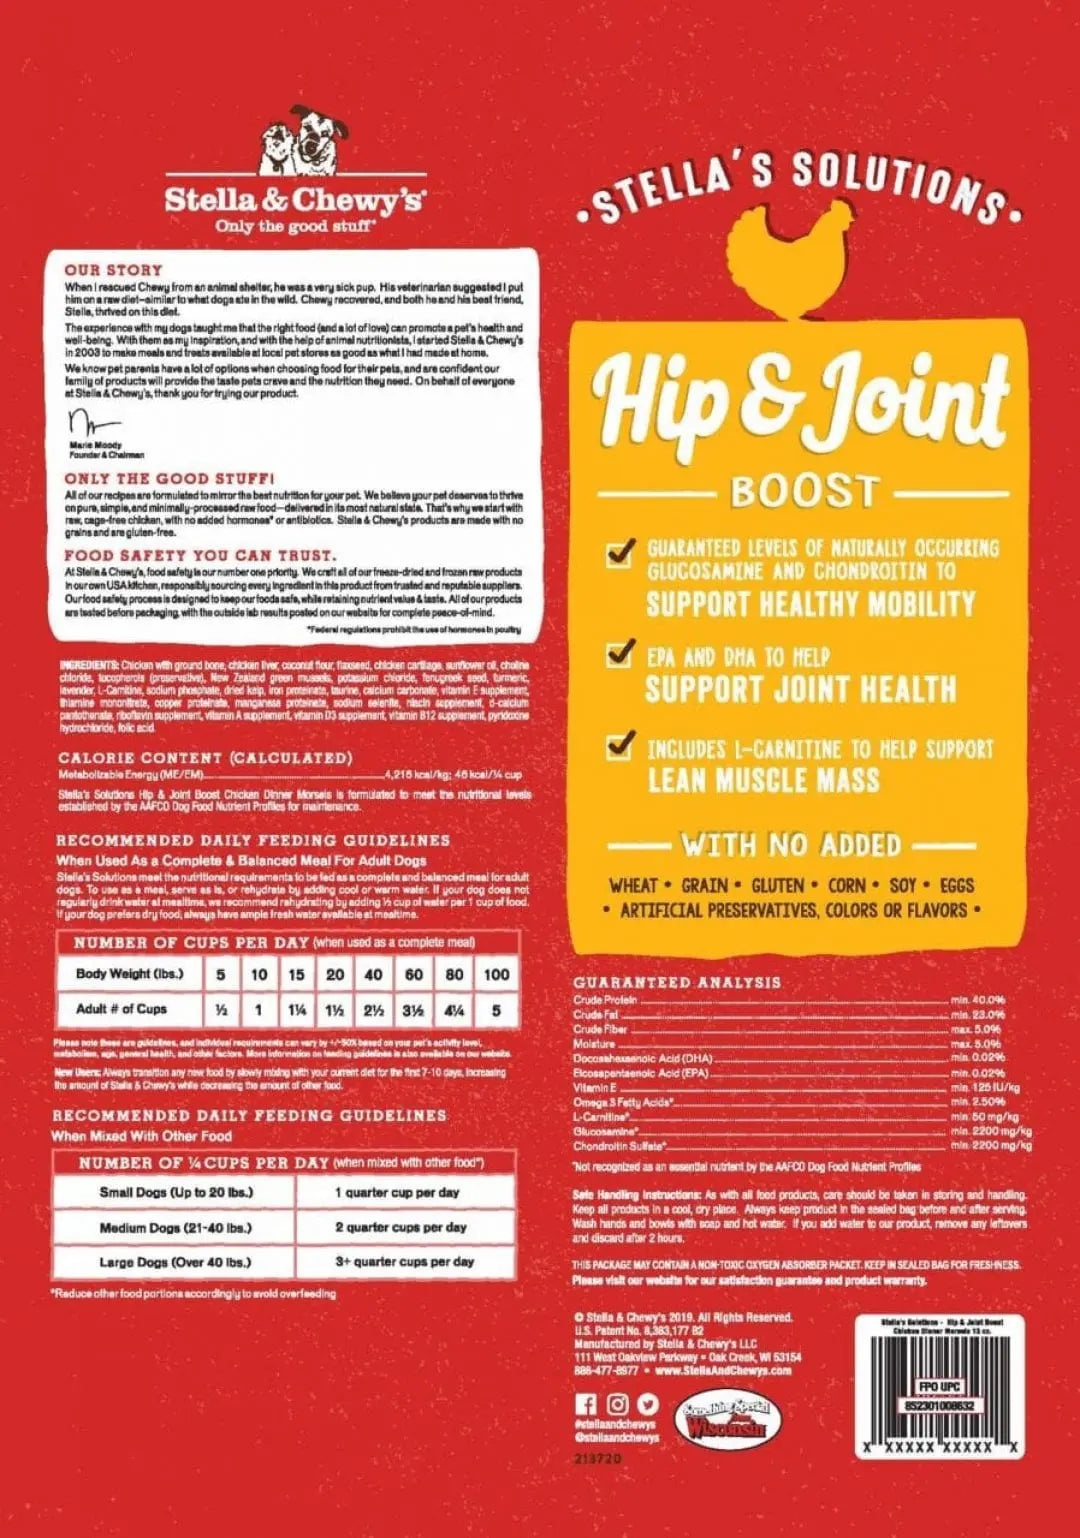 Stella & Chewy's Solutions Hip & Joint Boost